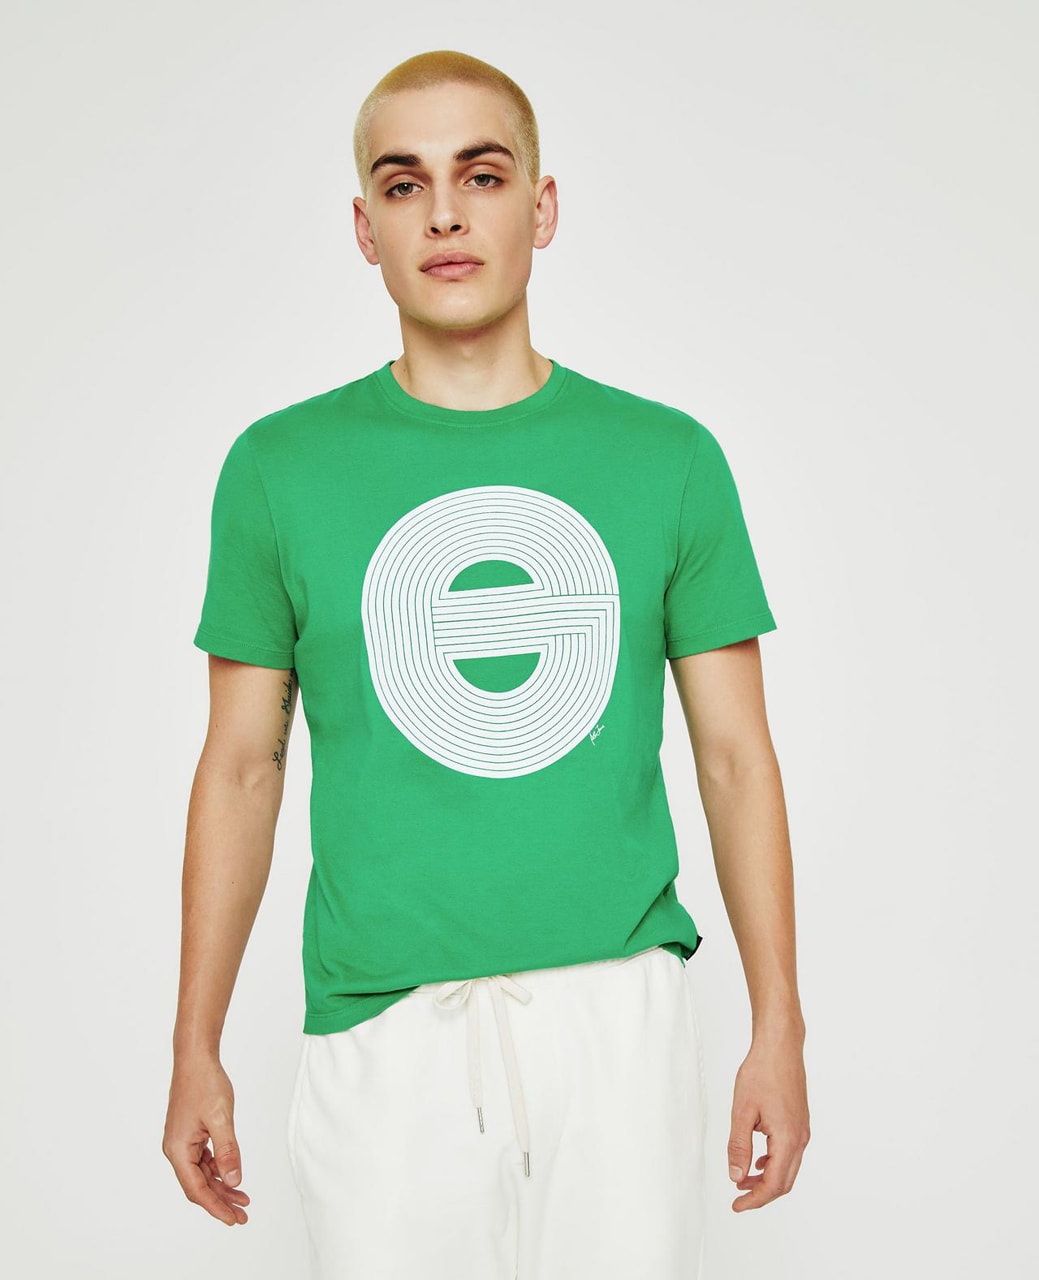 AG Springs Forward With New AGreen Capsule Collection for SS22